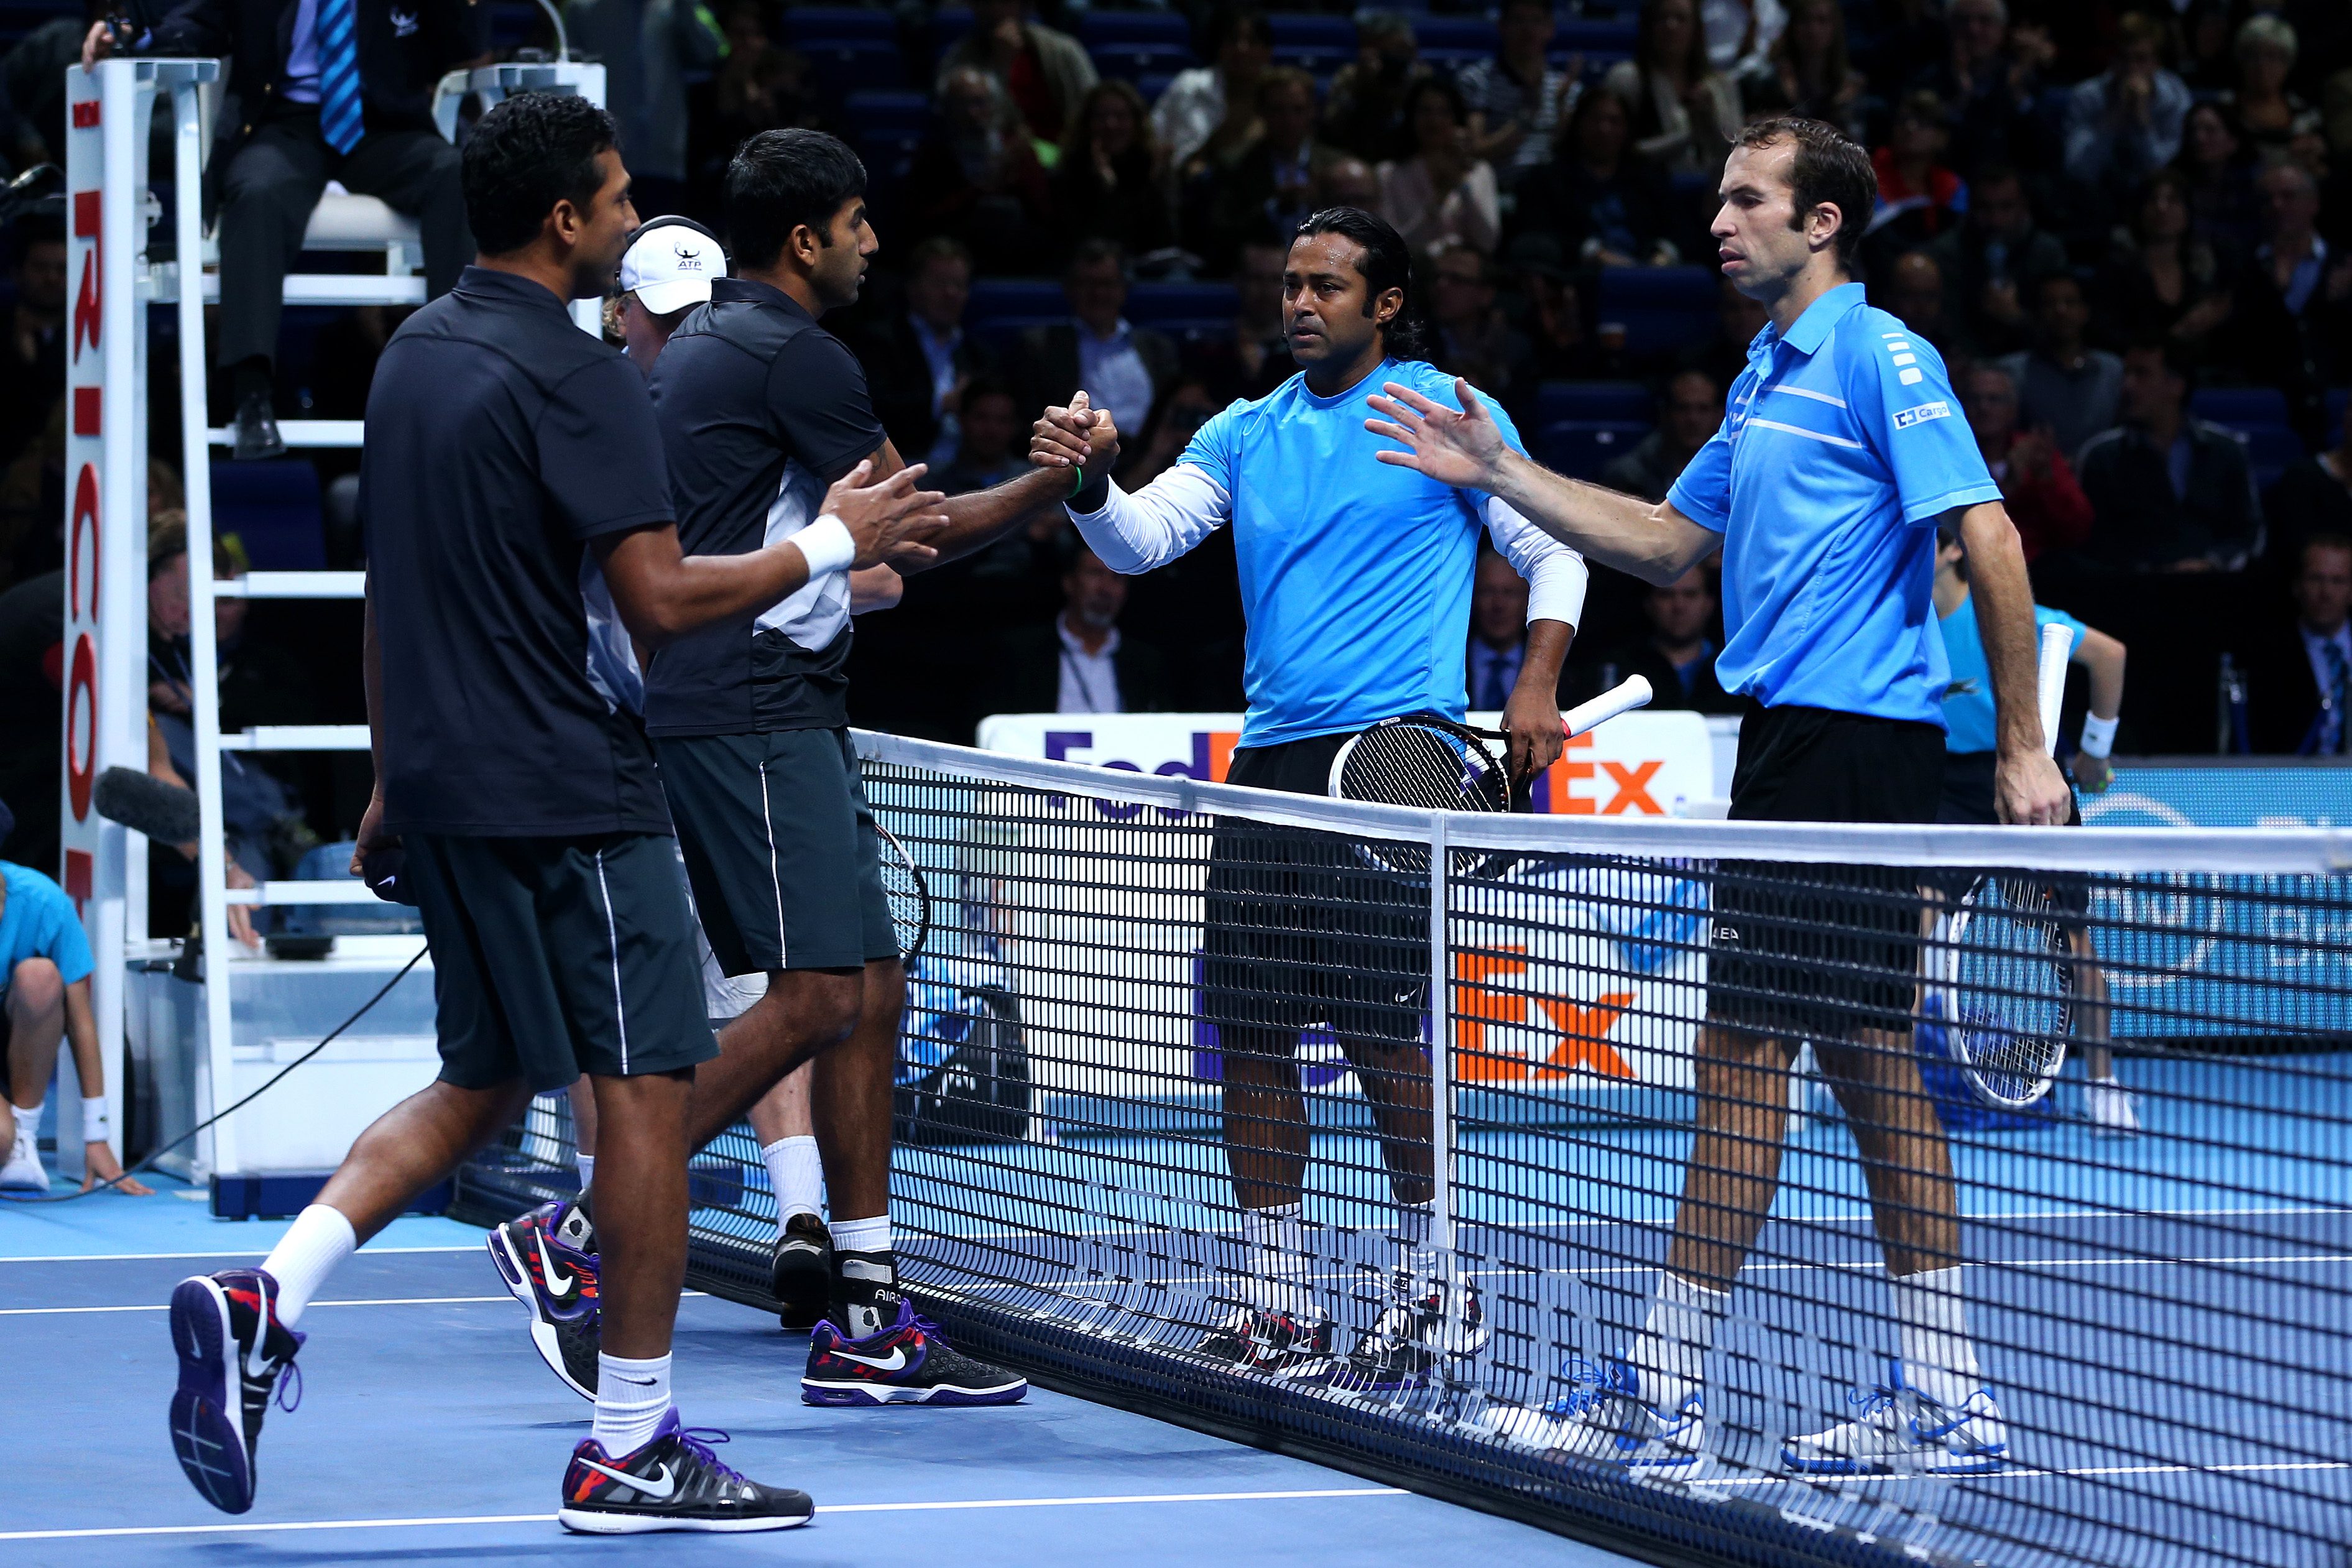 Mahesh Bhupathi, Leander Paes have left Indian tennis in a mess, says Vishal Uppal